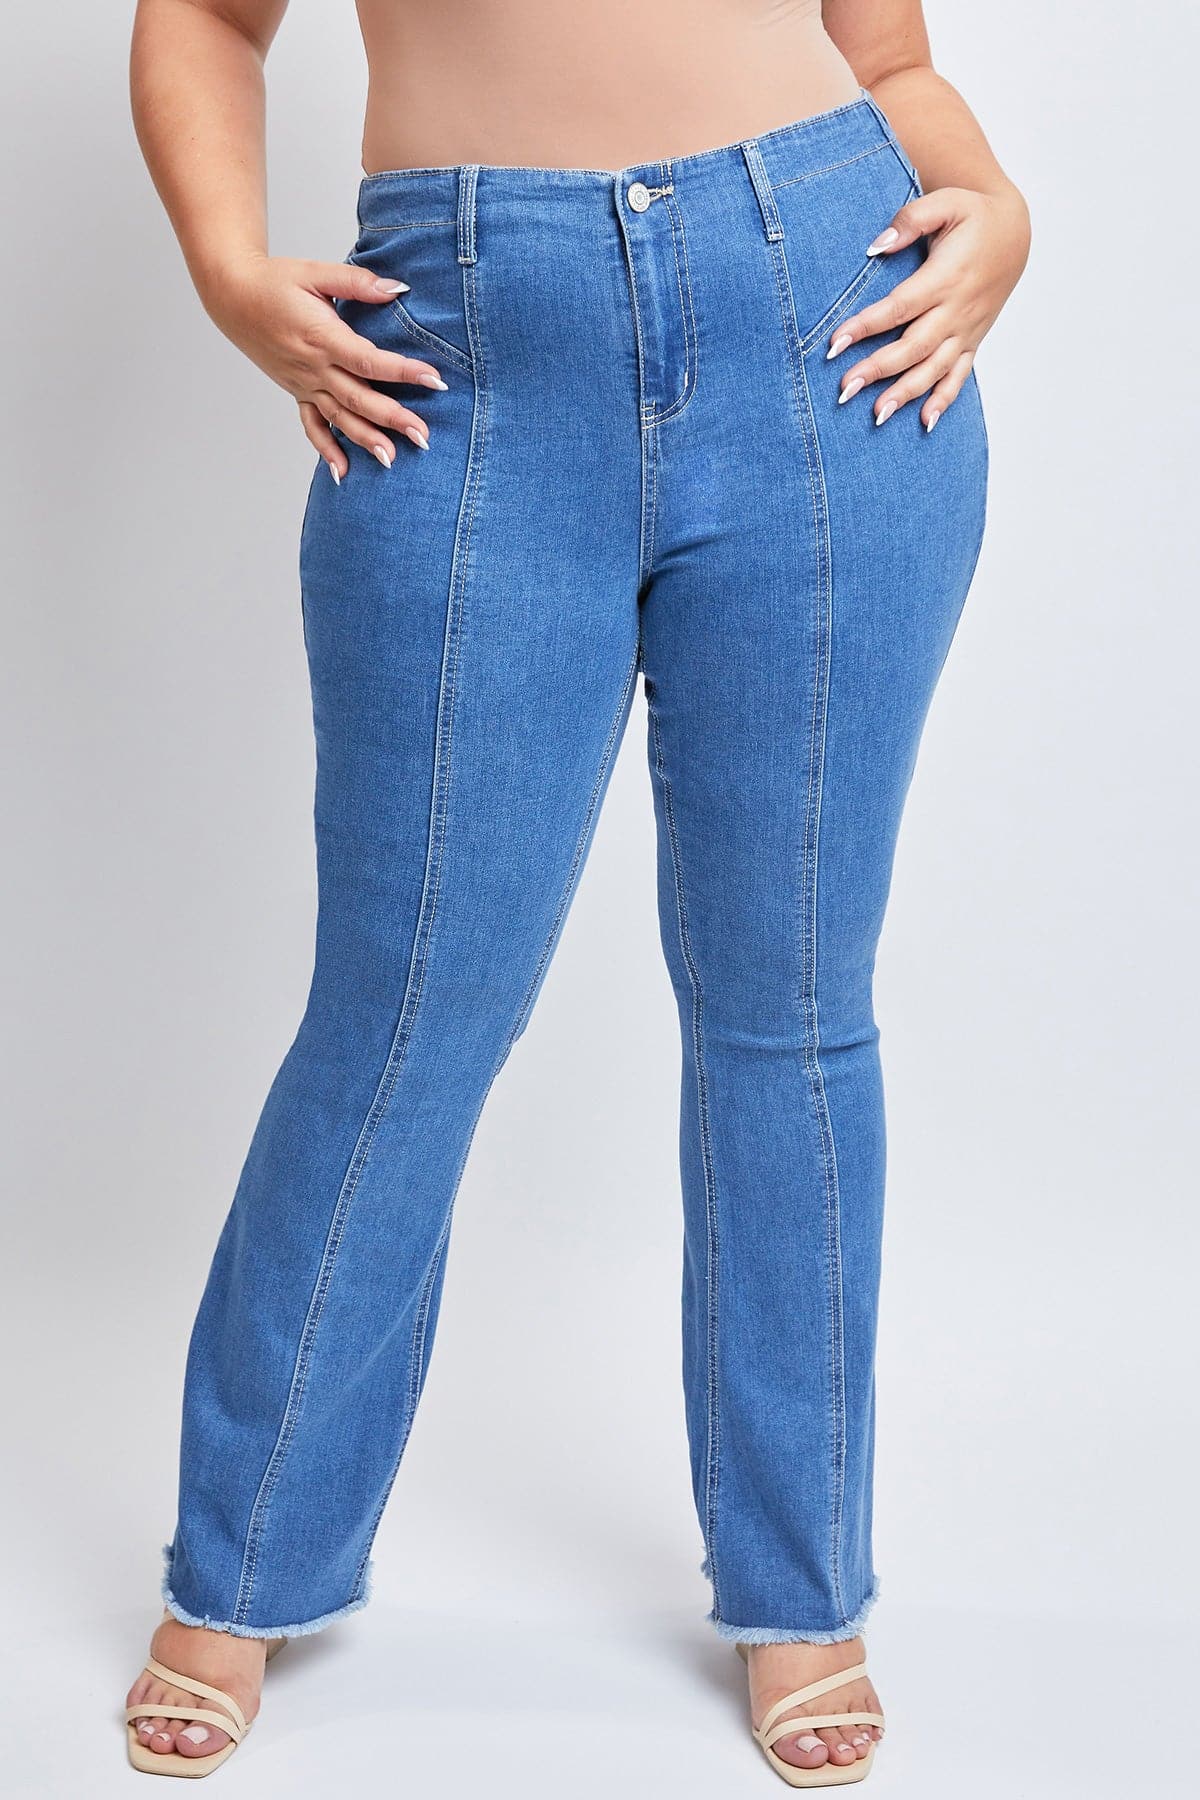 Plus Size Women's  Flare Jeans with Front Seam